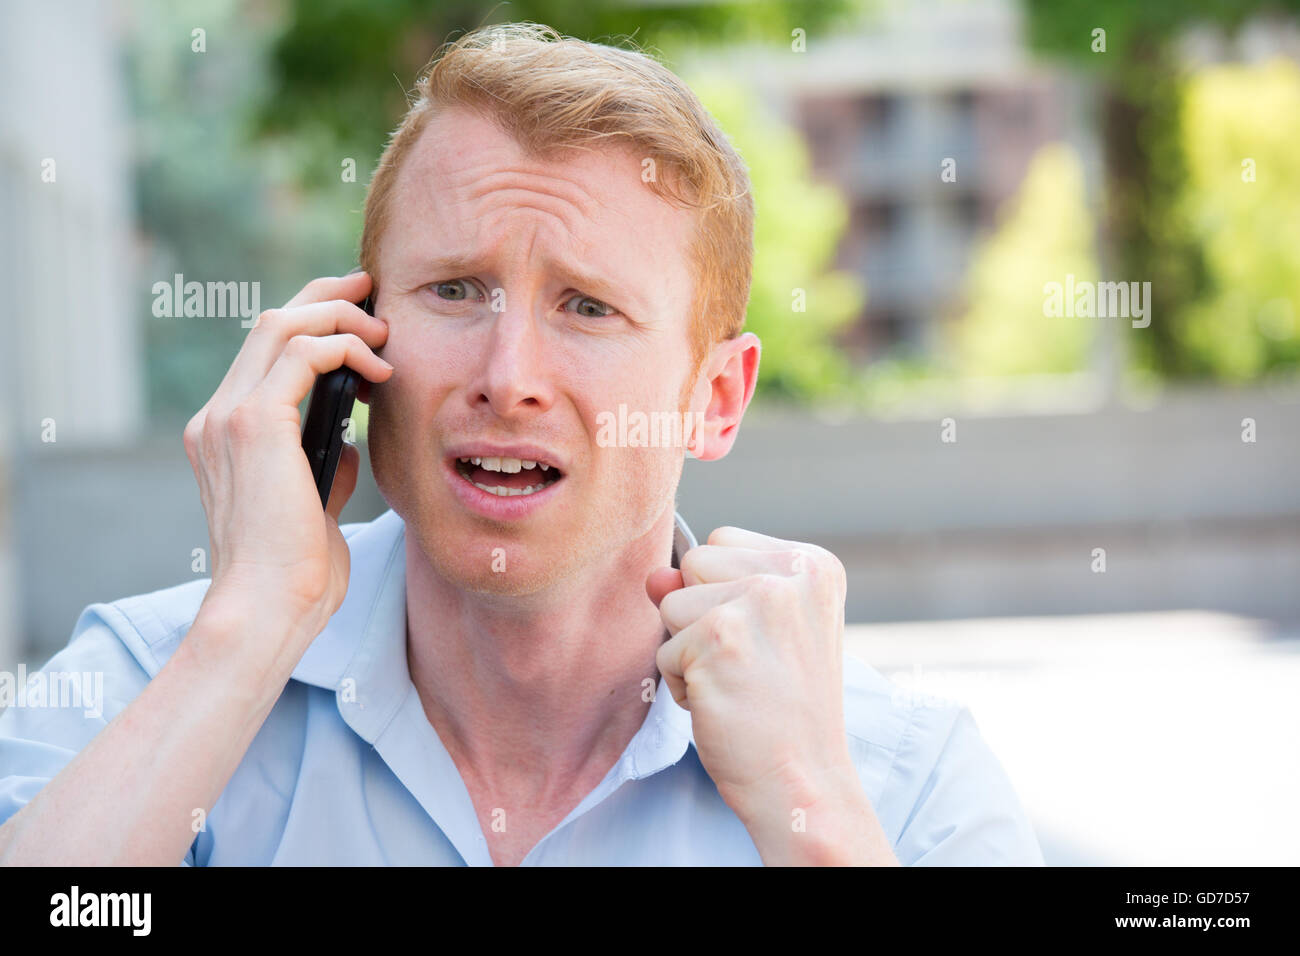 Closeup portrait, worried young man in blue shirt talking on phone to someone, looking gloomy, isolated outdoors outside backgro Stock Photo